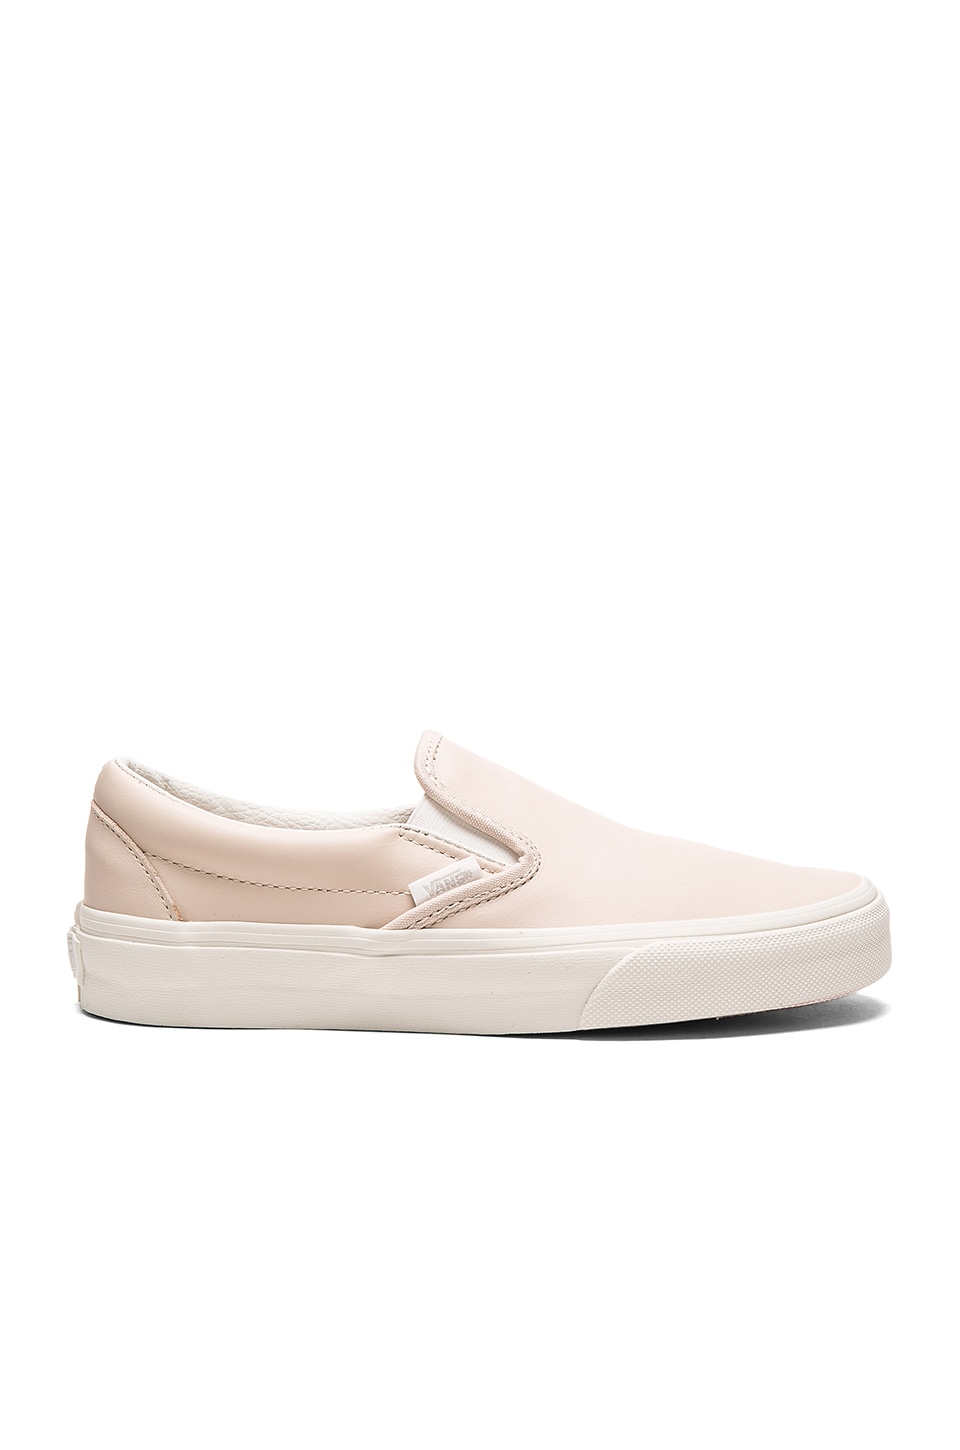 Cornwall Beschrijving zoon Vans Leather Classic Slip-On in Whispering Pink & Blanc de Blanc | REVOLVE